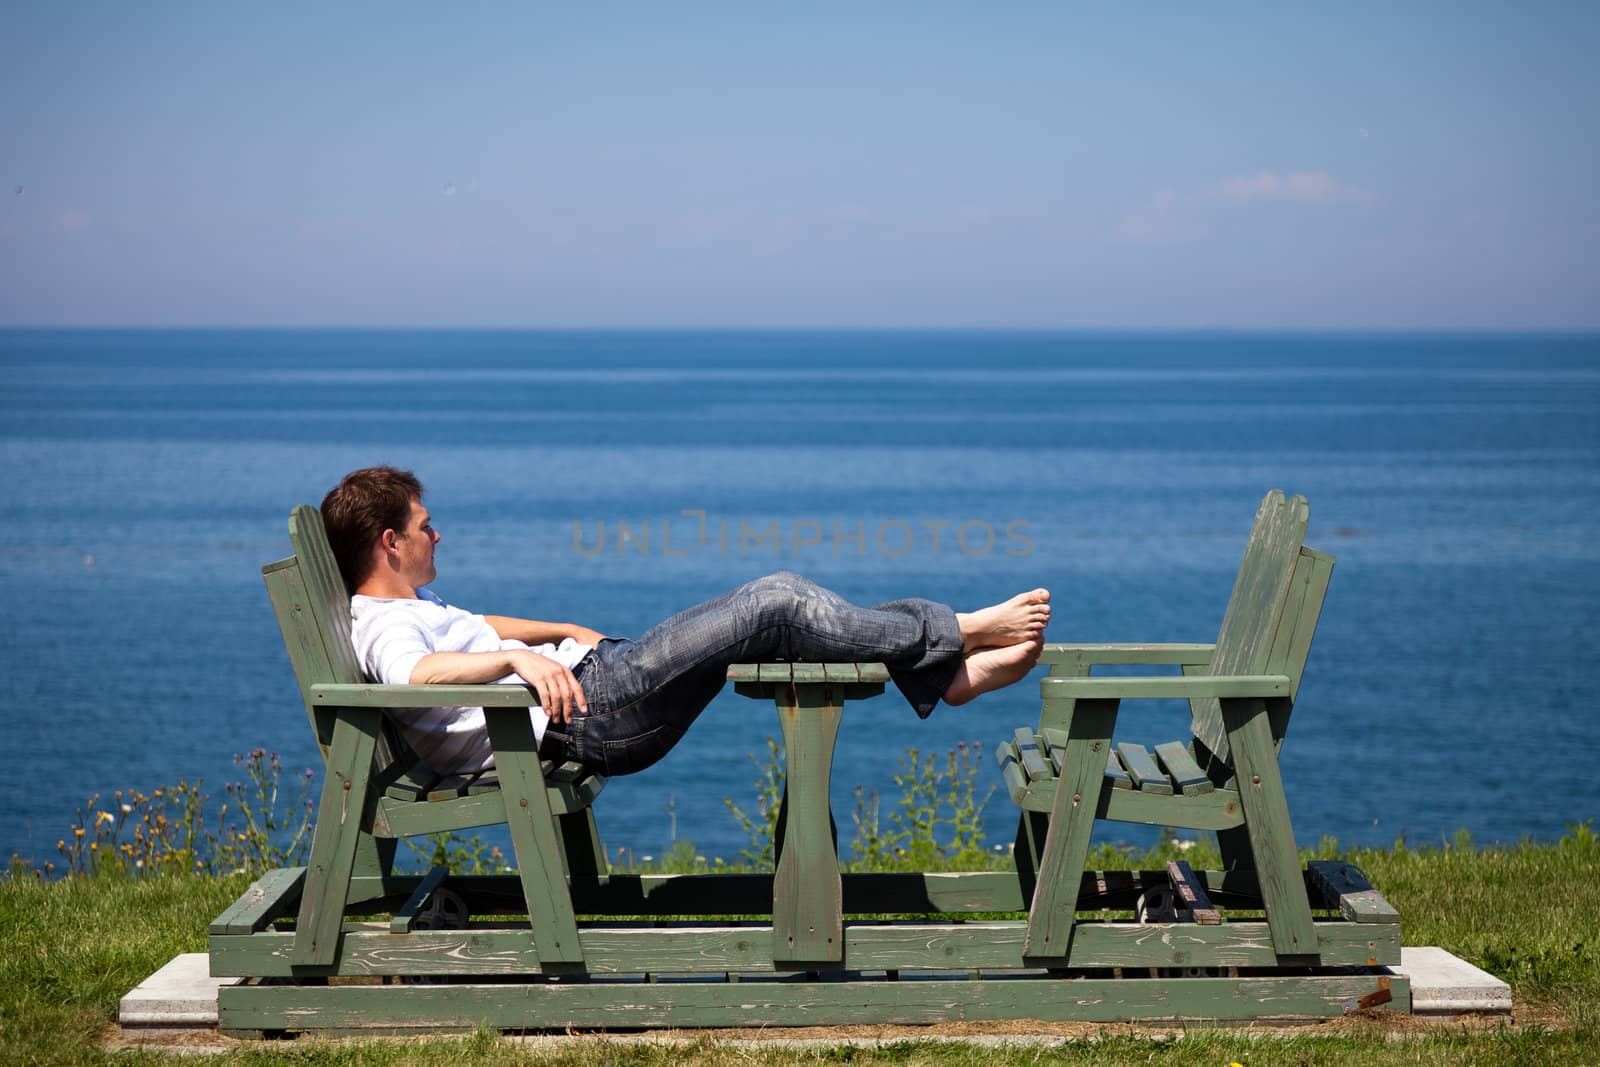 Man alone on a bench in vacation